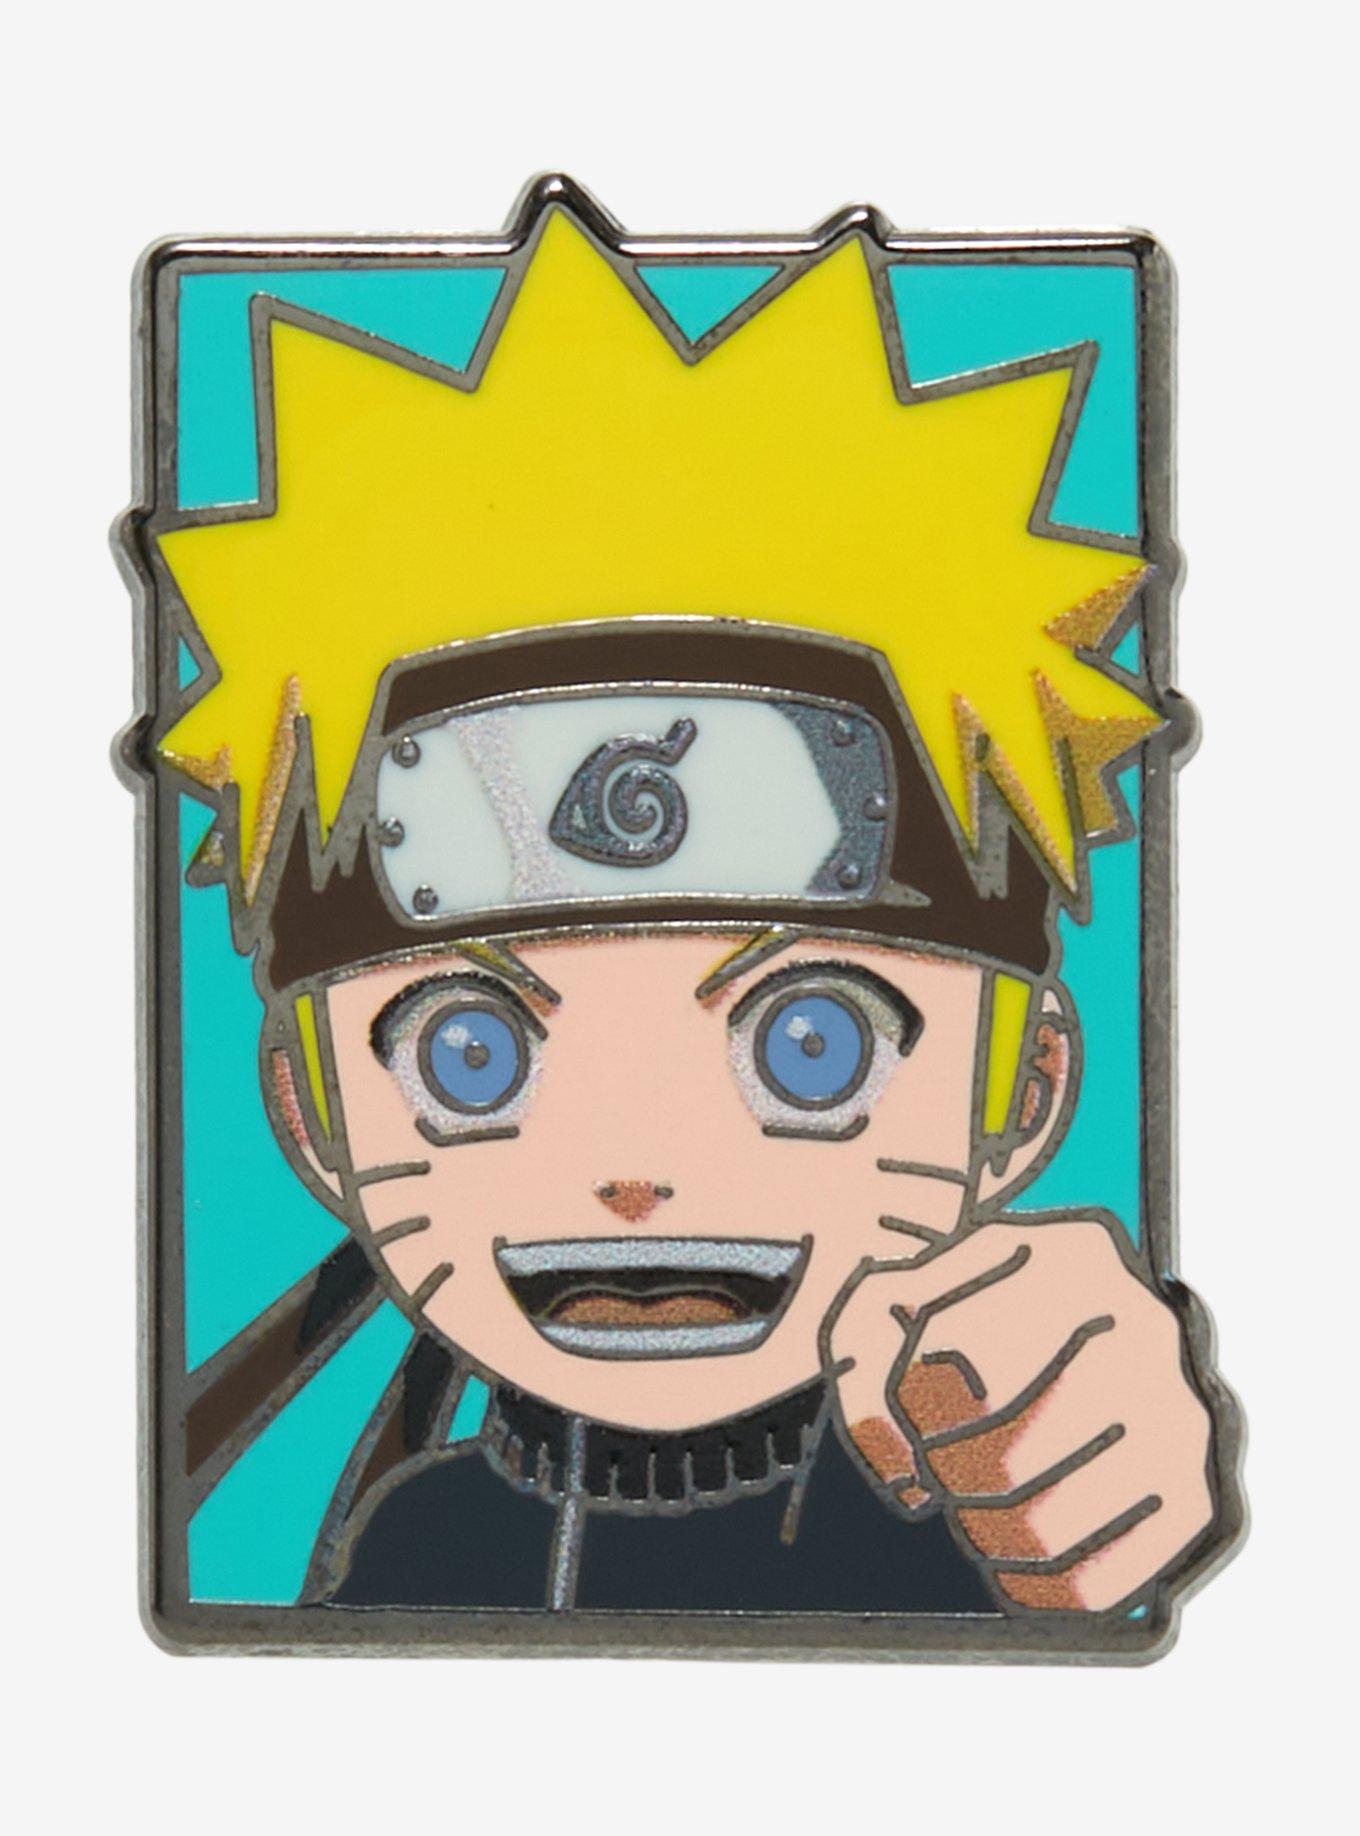 Ground Up International Officially Licensed Naruto